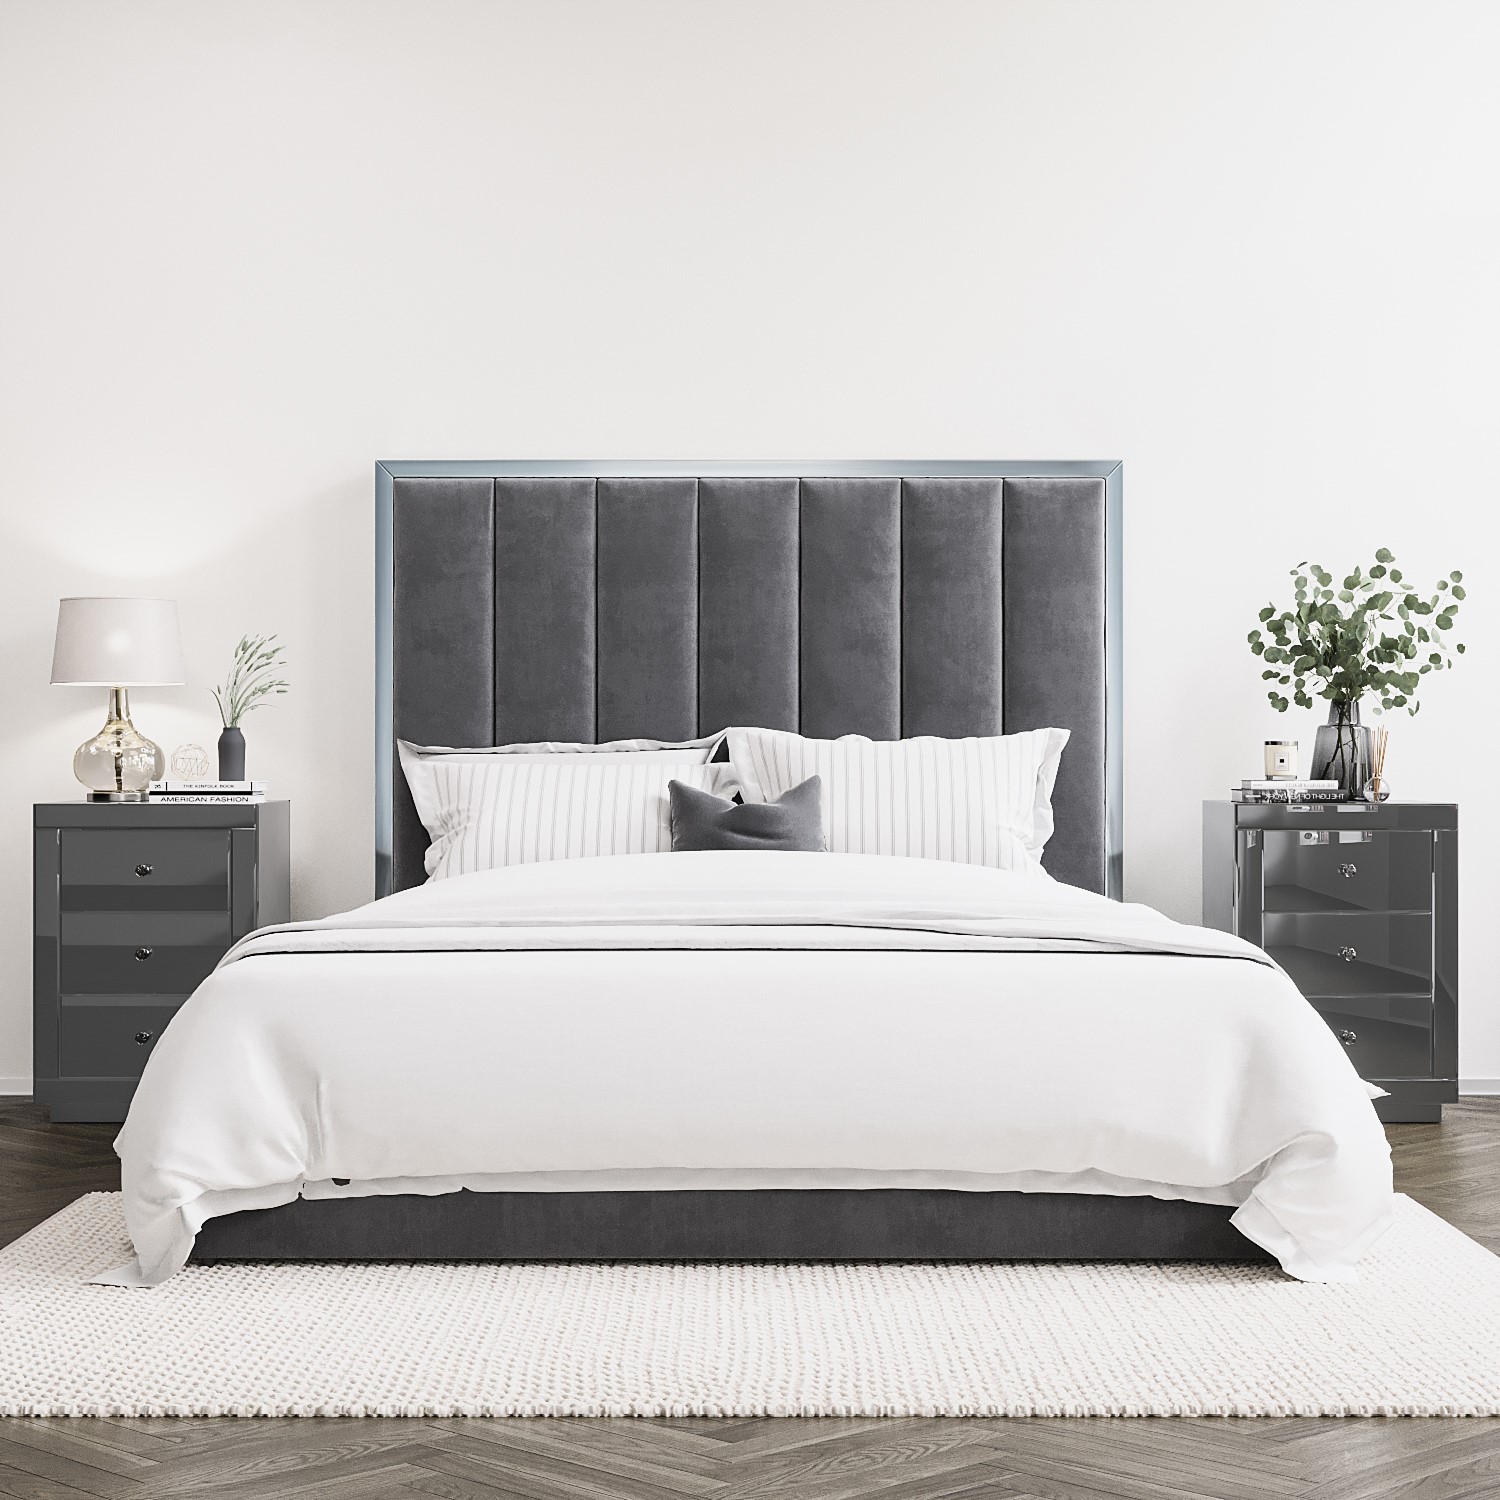 Grey Velvet King Size Ottoman Bed With, Grey Tufted Headboard King Size Bed